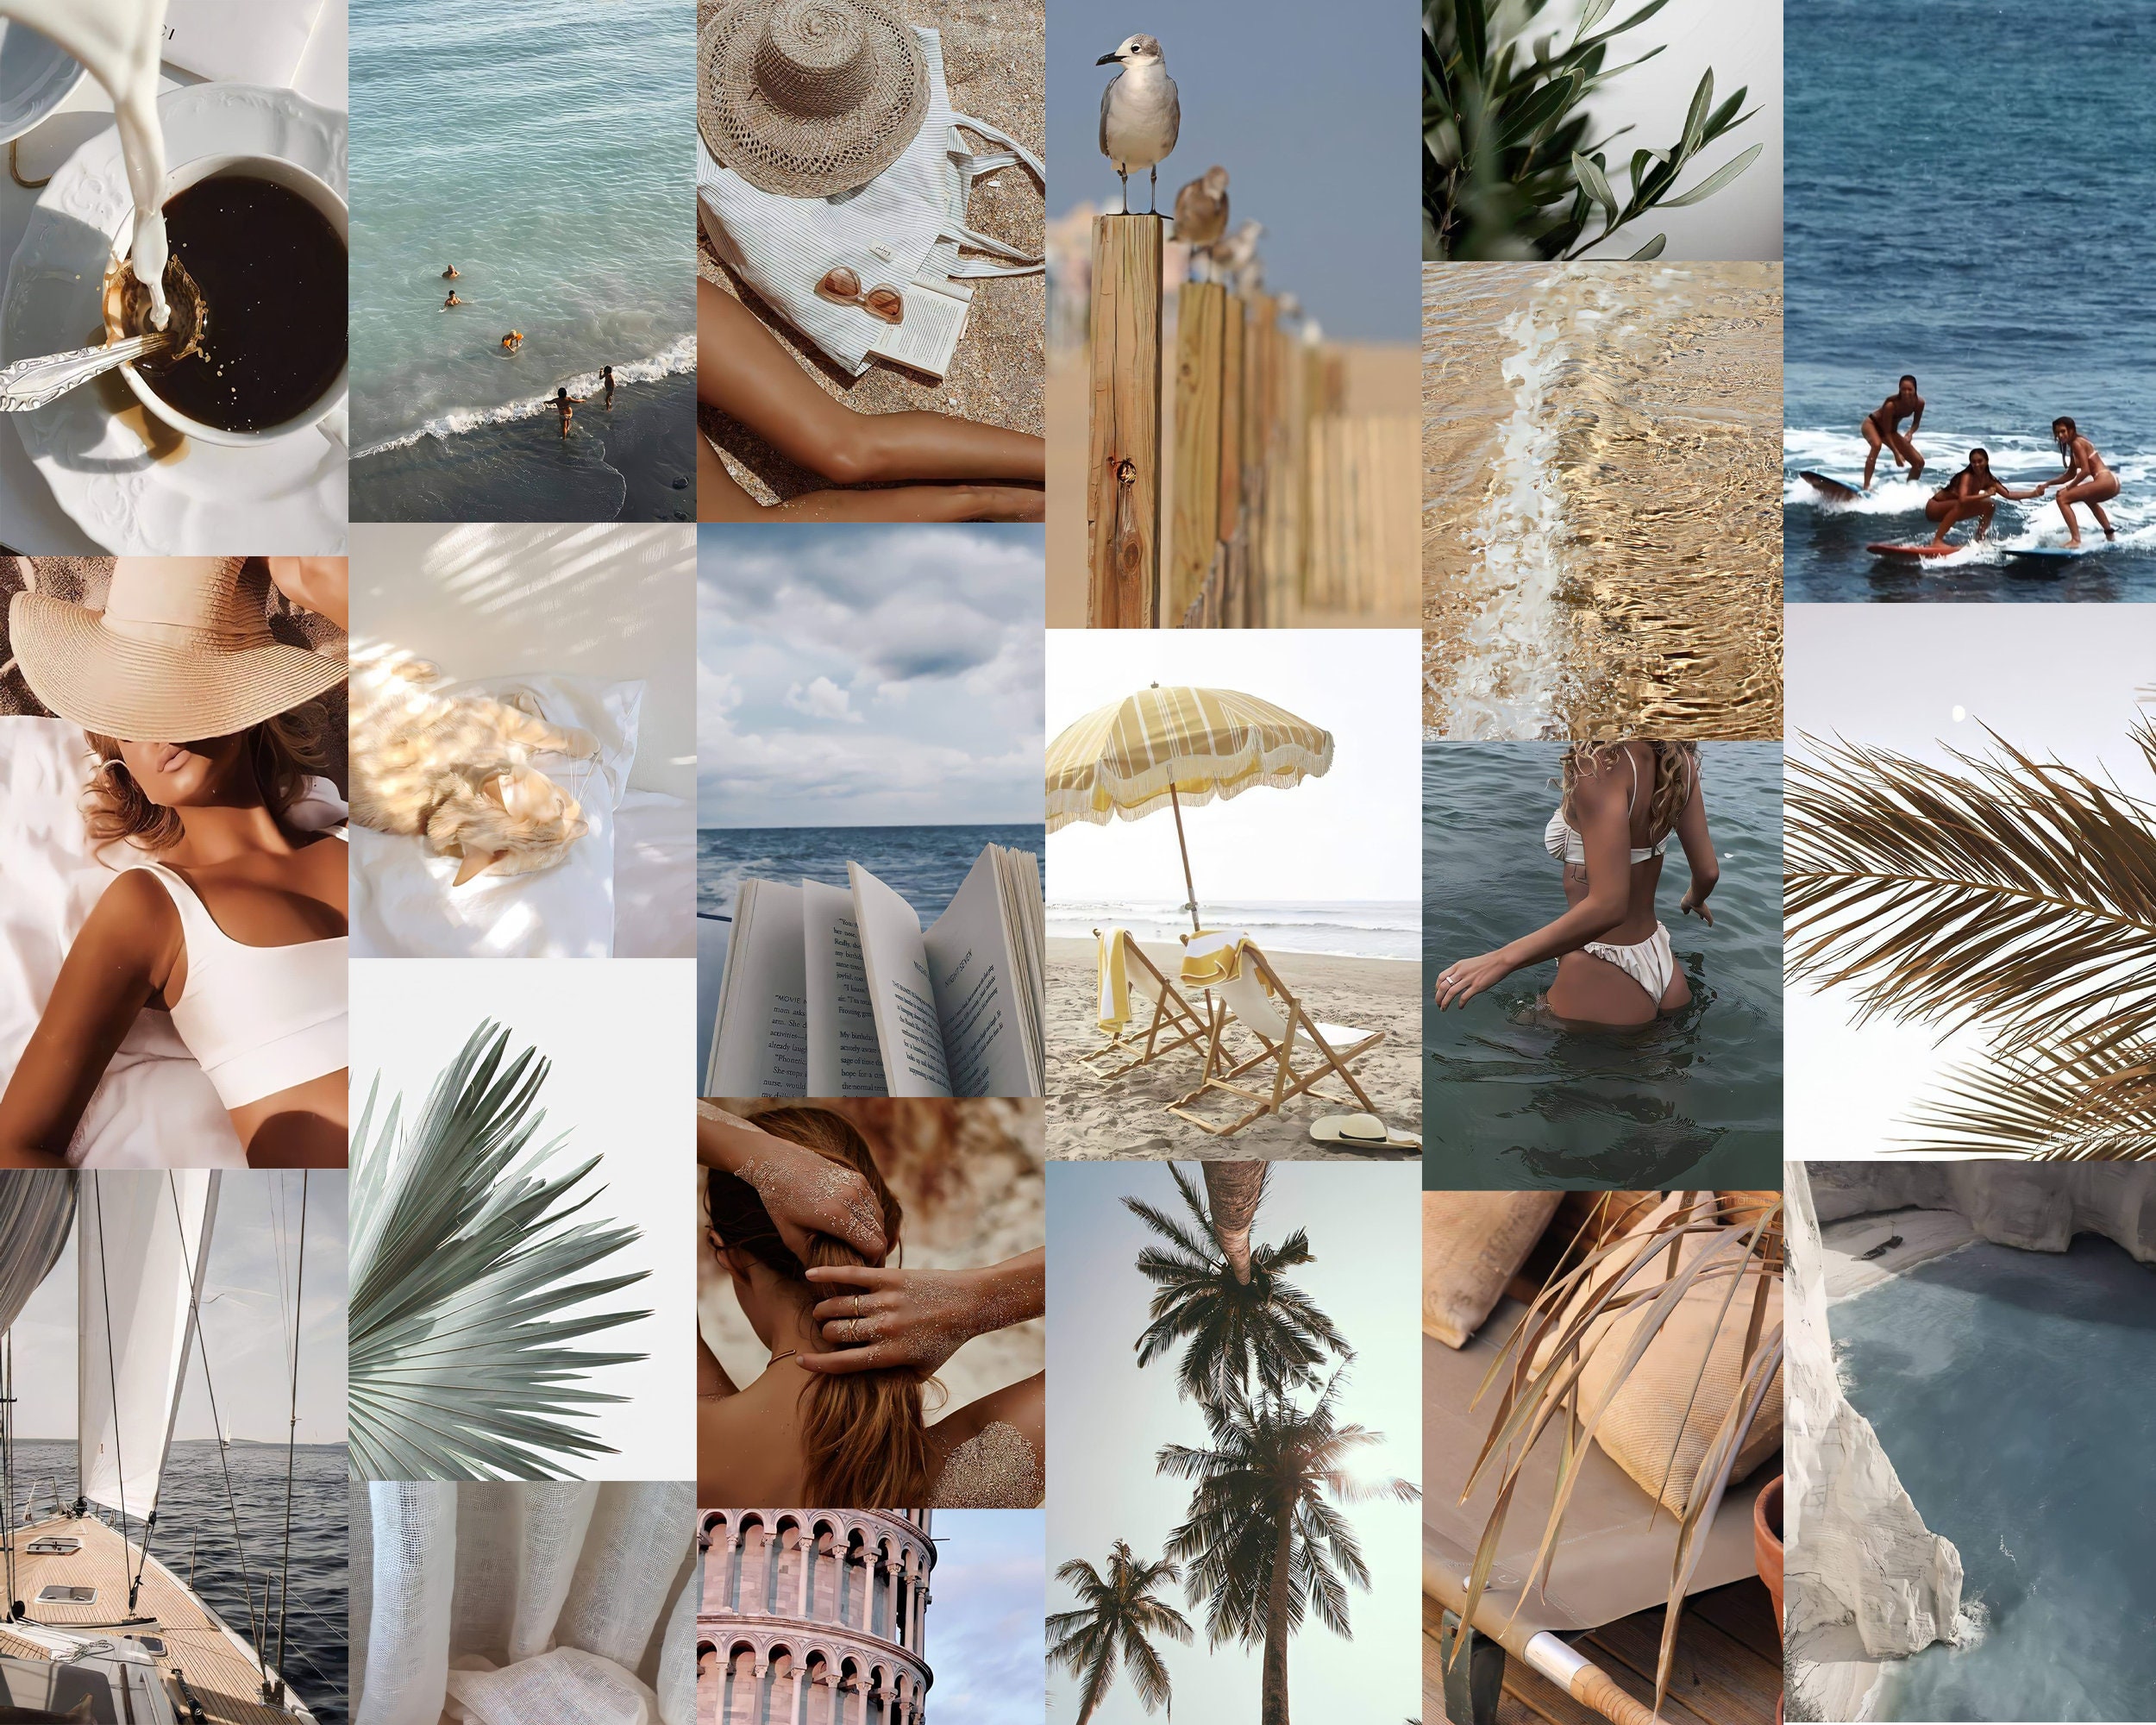 NUDE BEACH AESTHETIC Digital Wall Collage Kit 50 Images - Etsy UK